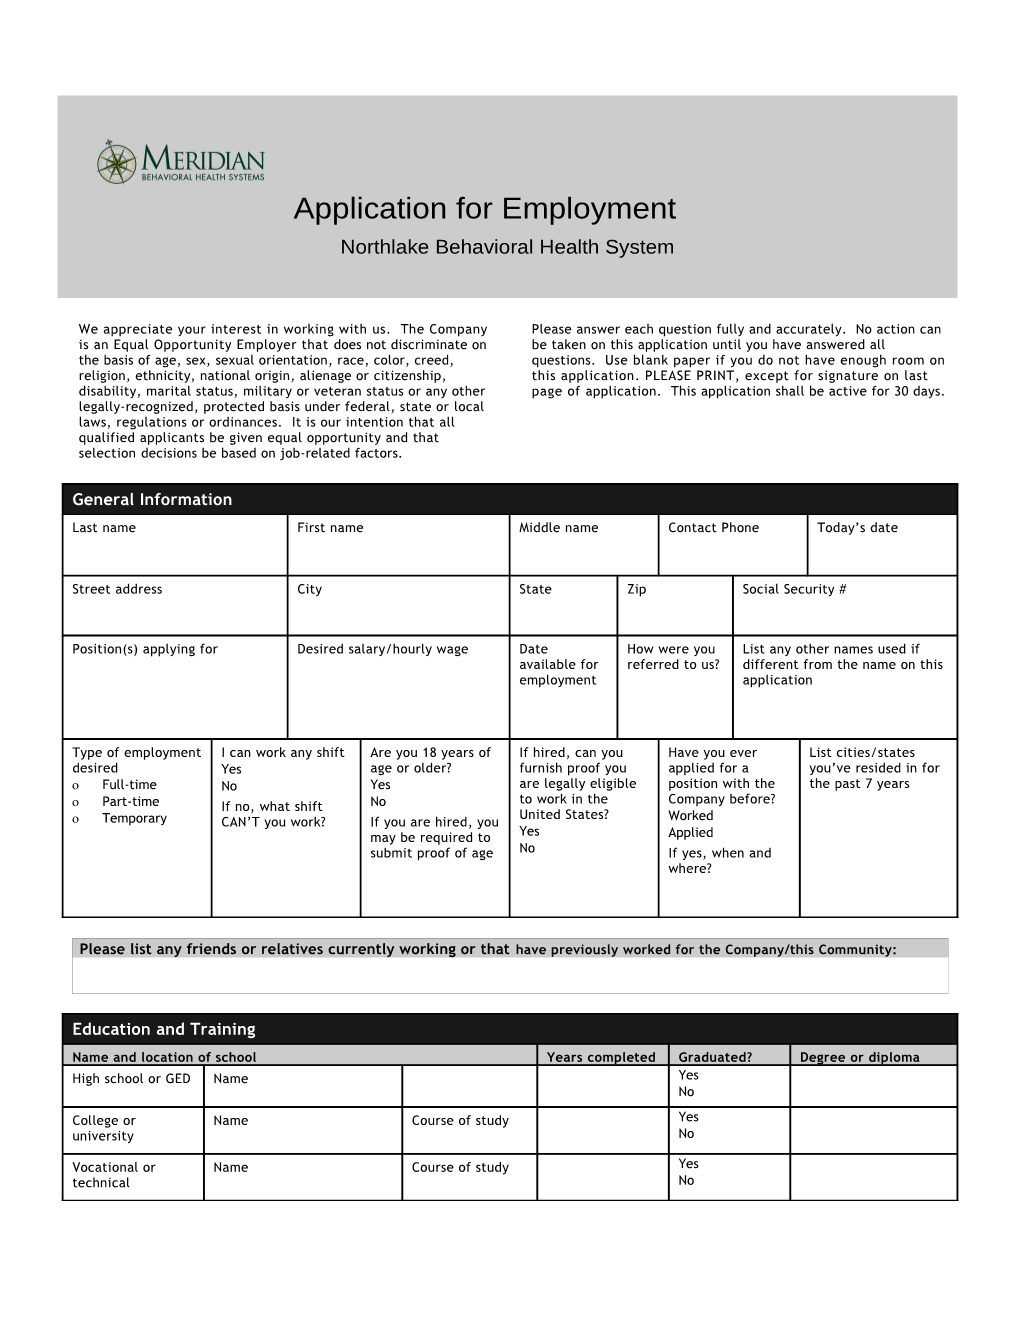 Application for Employment s159